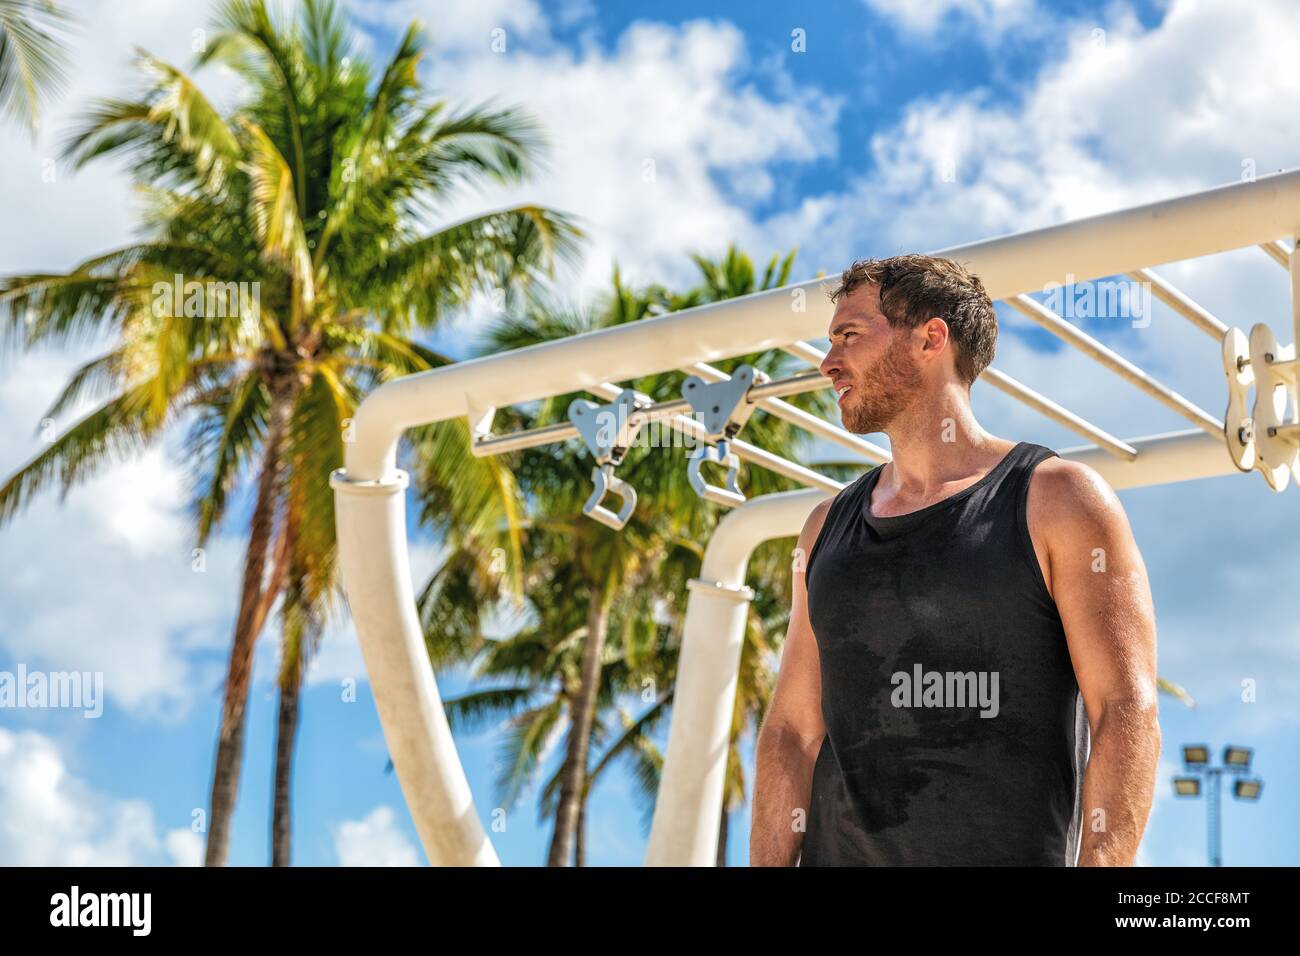 Outdoor calisthenics gym park male athlete working out on monkey bars outside in summer. Man workout Stock Photo